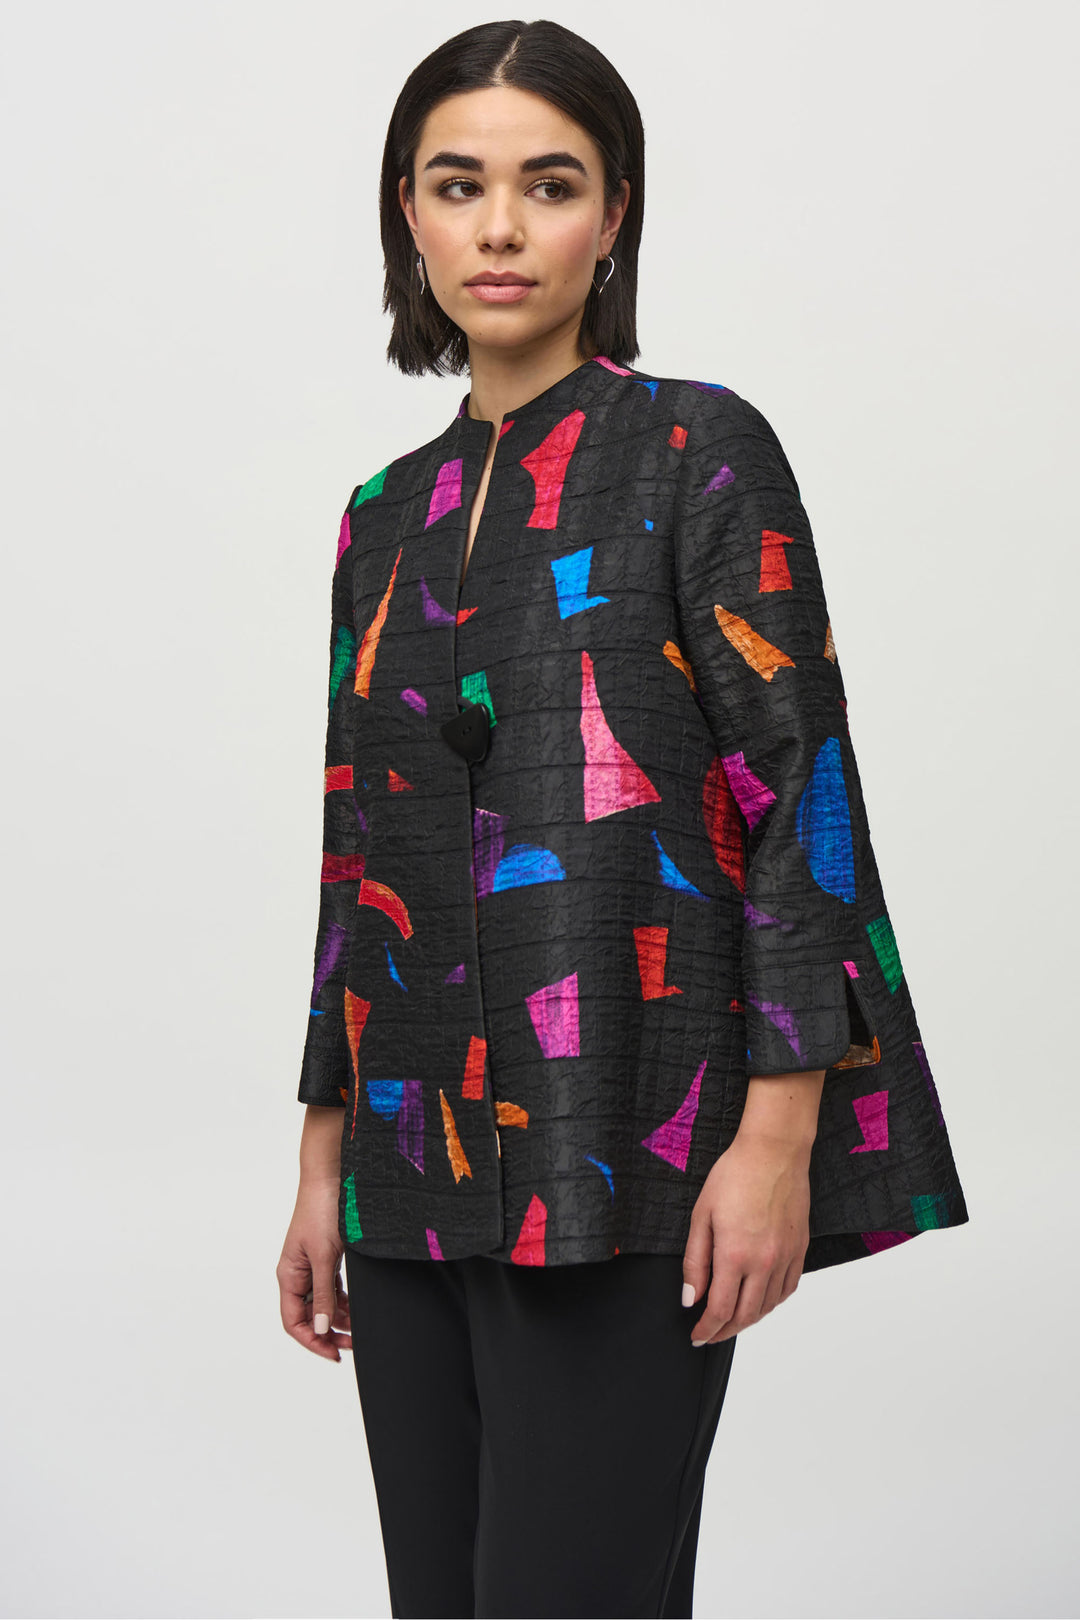 Joseph Ribkoff Fall 2024 Crafted with 3/4 cuffed sleeves and a single button with a mandarin collar, this stunning trapeze jacket boasts an abstract print to create volume and dimension overall.